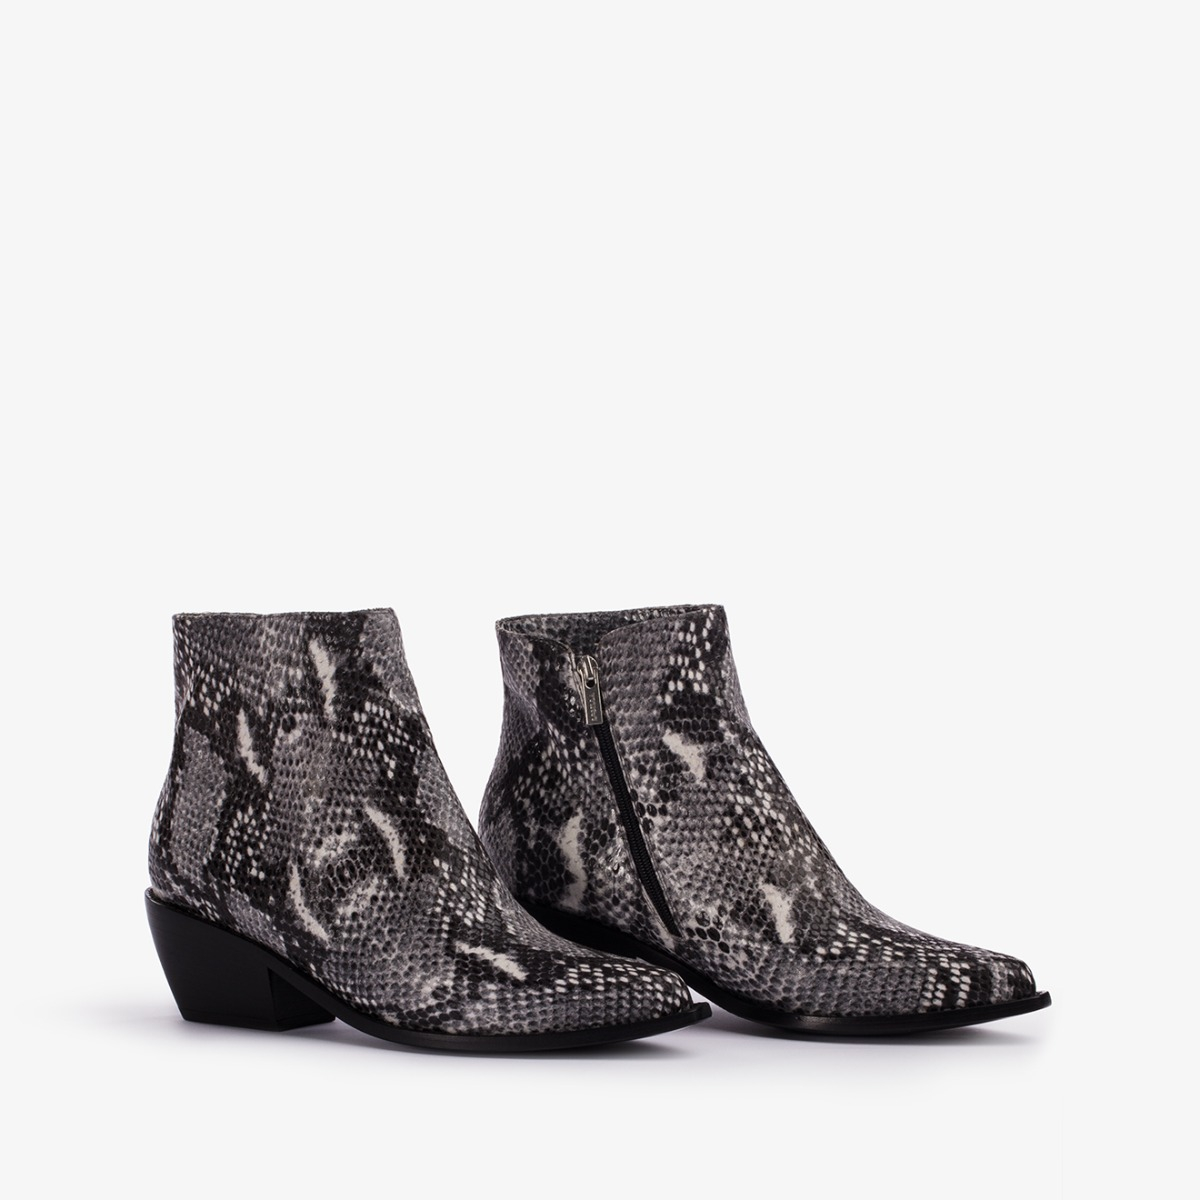 CHRISTINE COWBOY ANKLE BOOT 70 mm - Le Silla official outlet